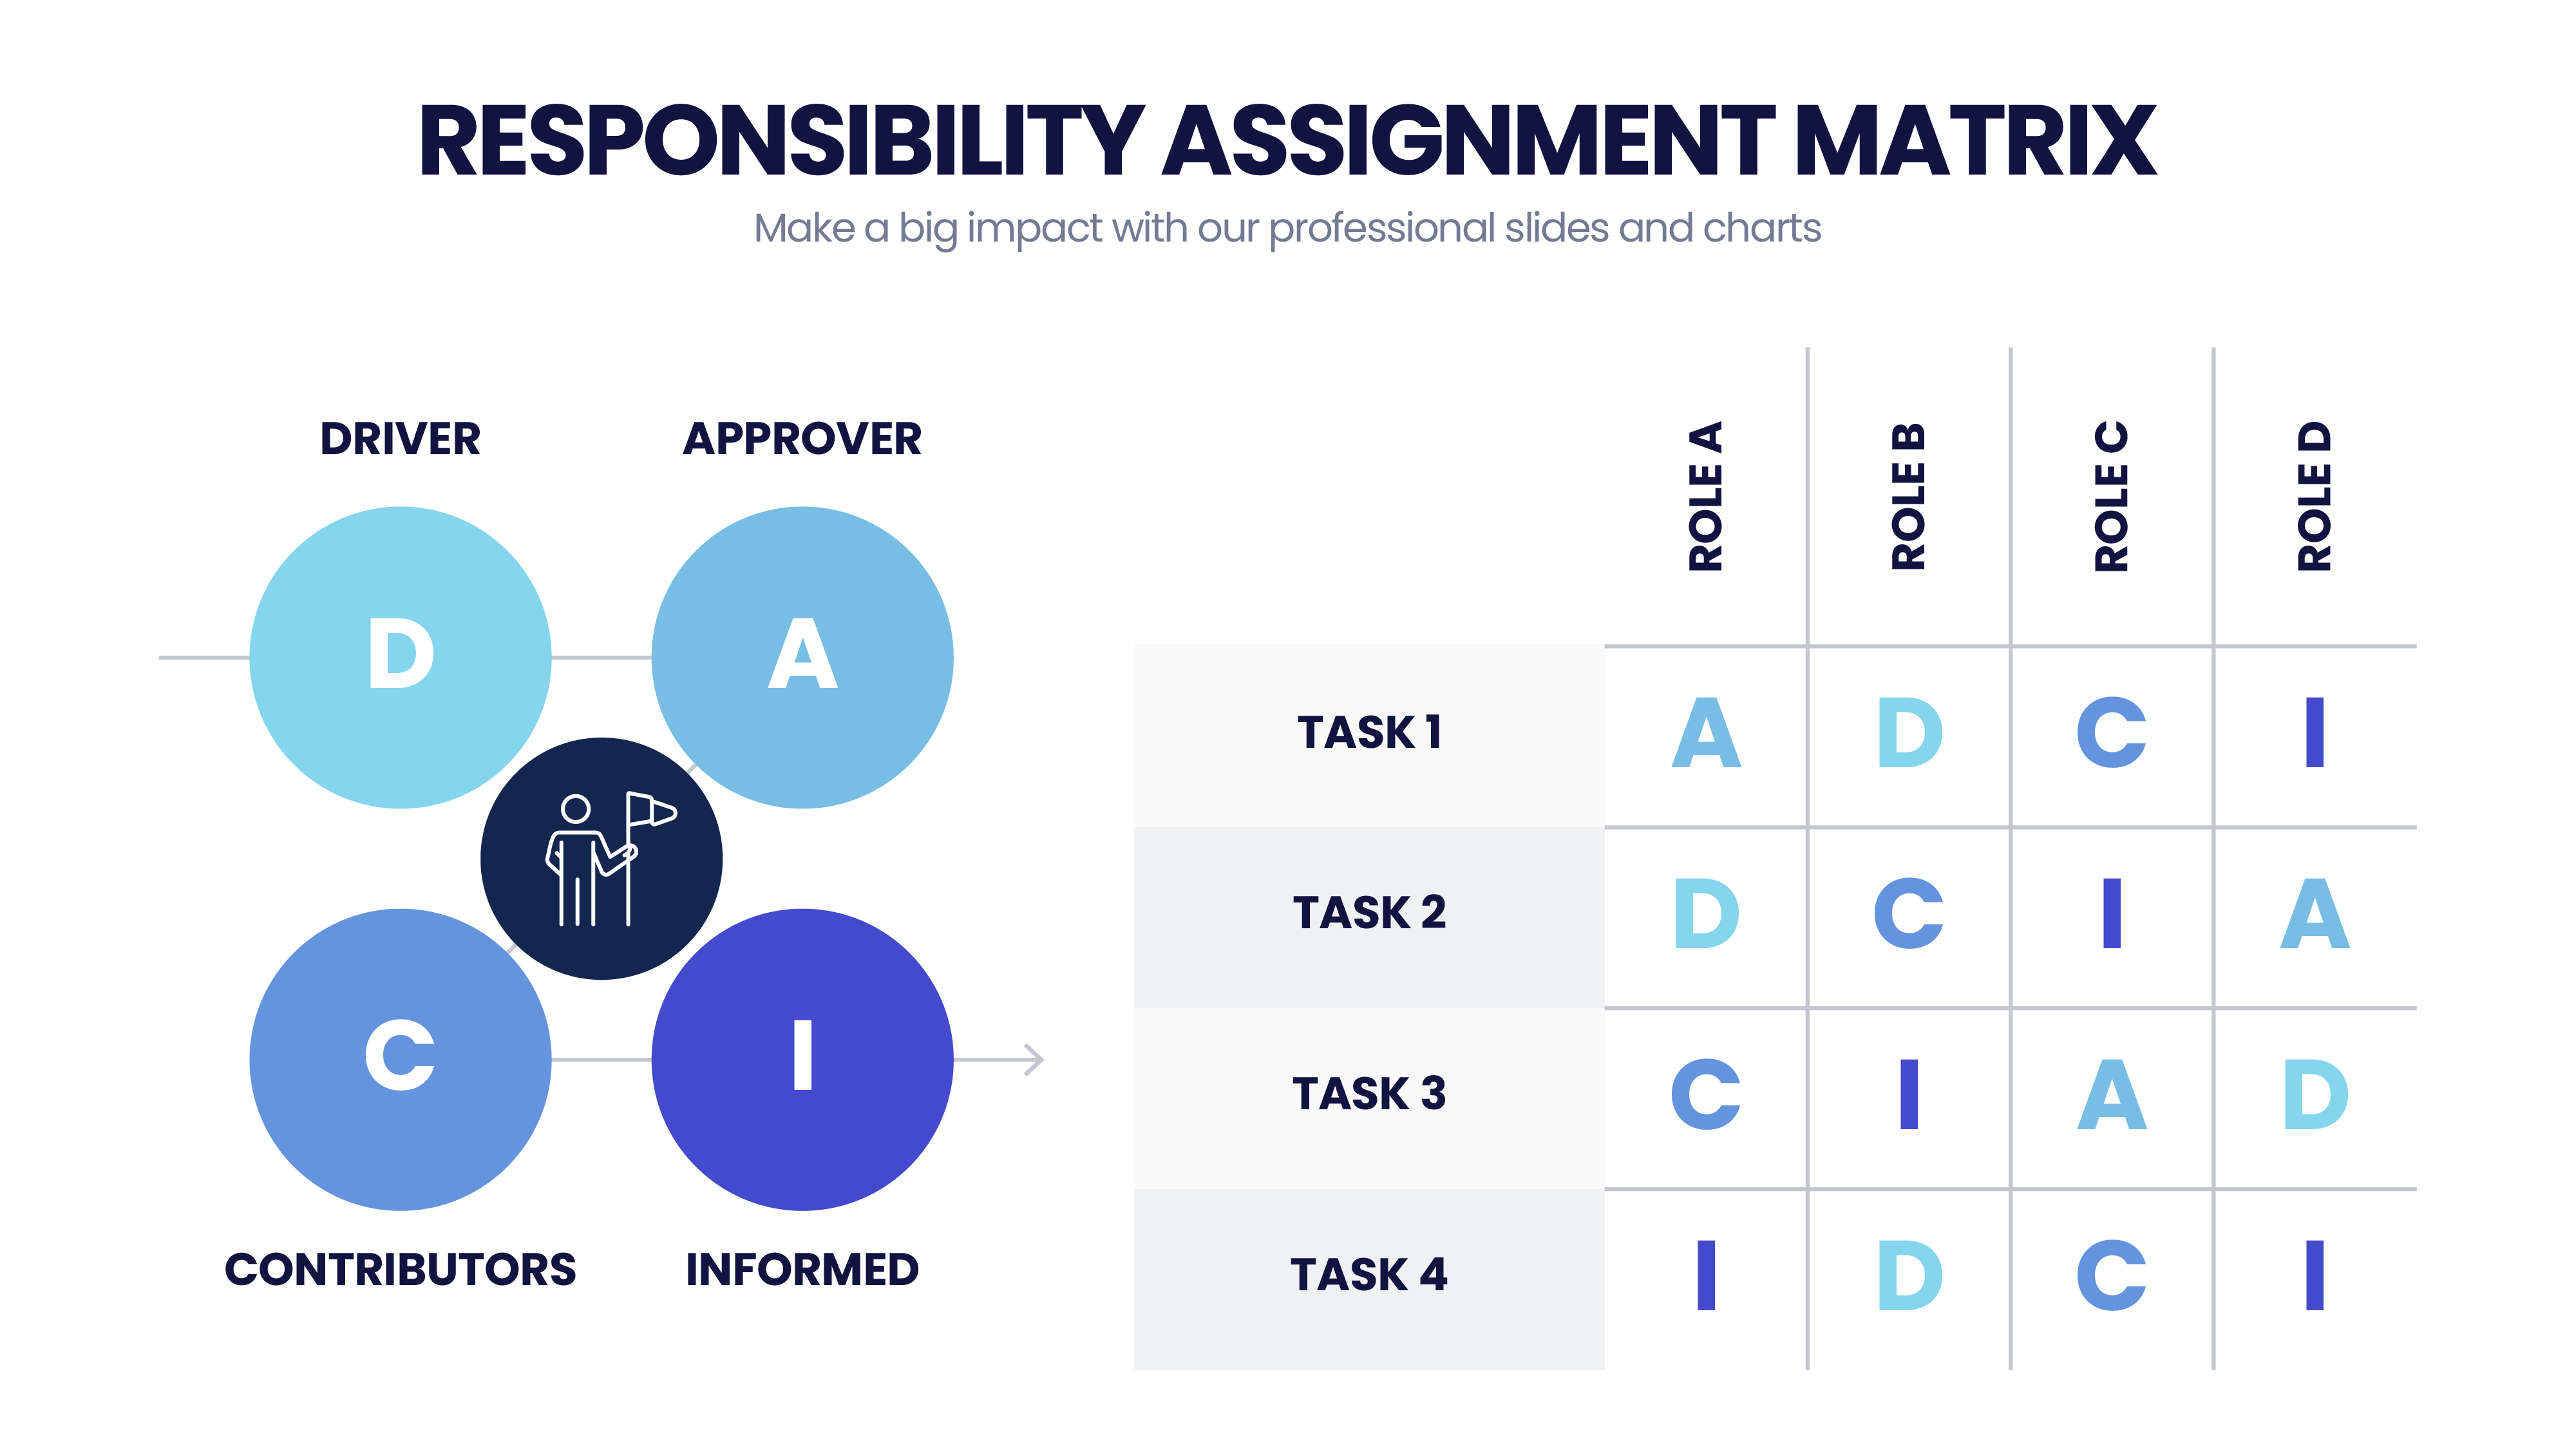 responsibility assignment matrix does not include